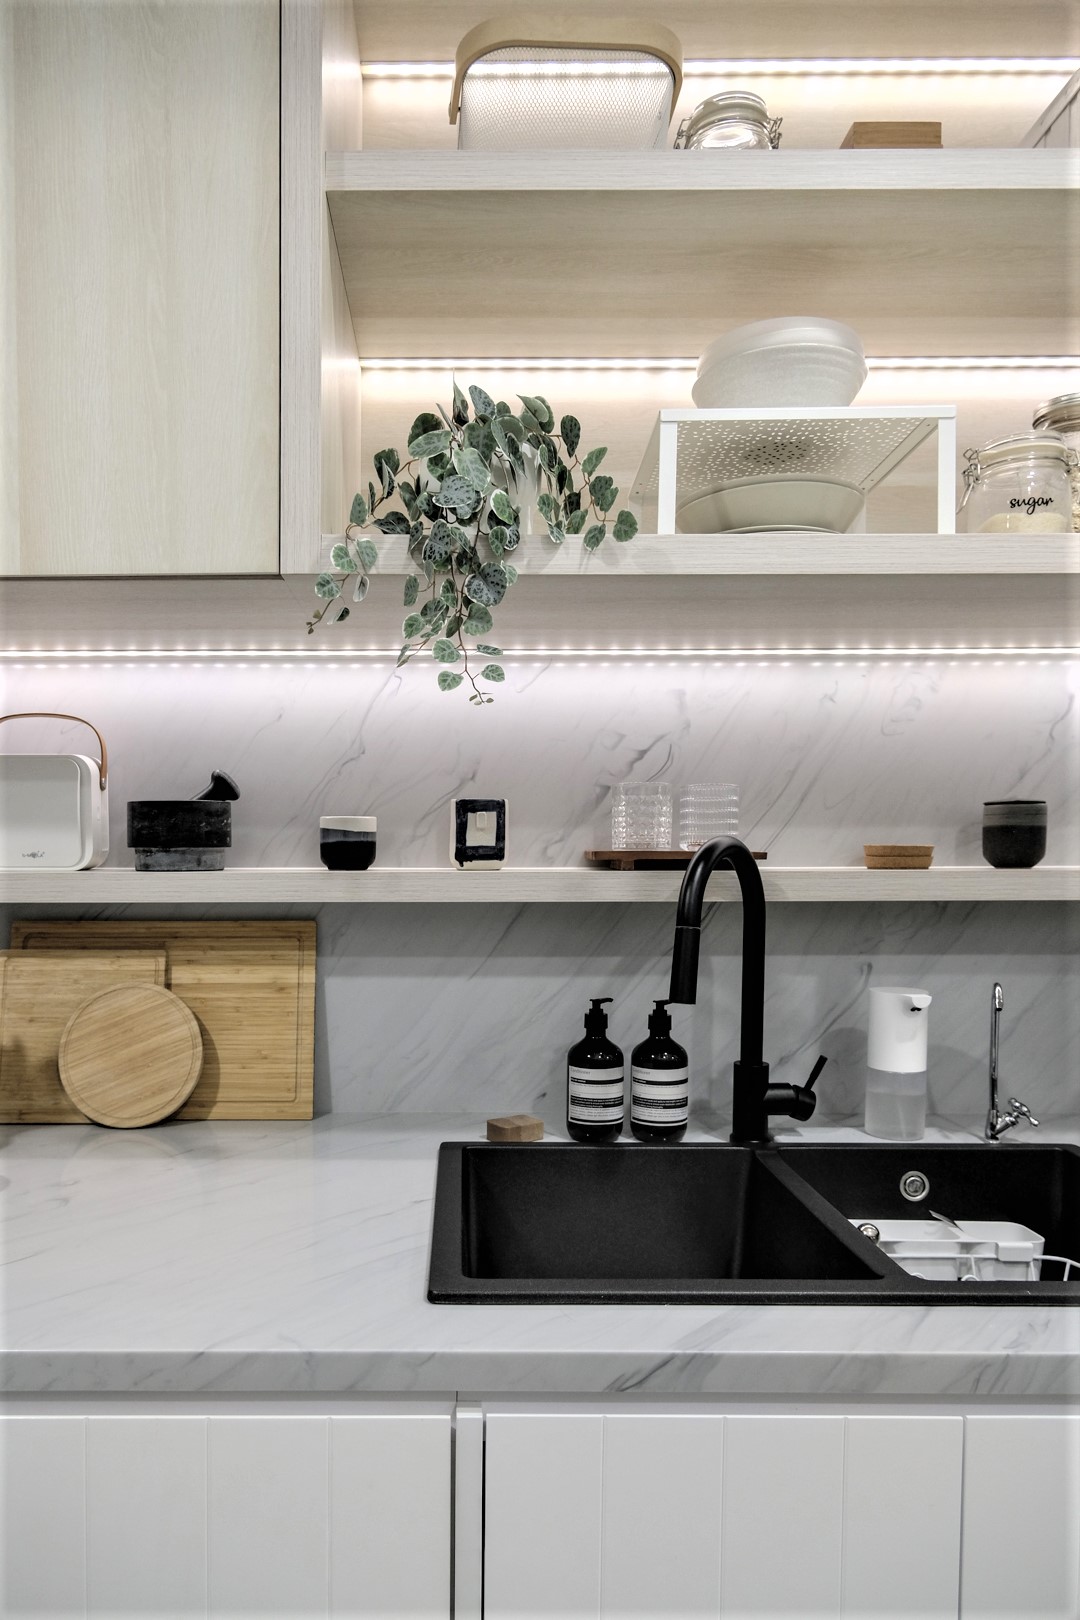 A small apartment kitchen, designed with light wood cabinets, has strips of LED lighting that keeps the space bright.